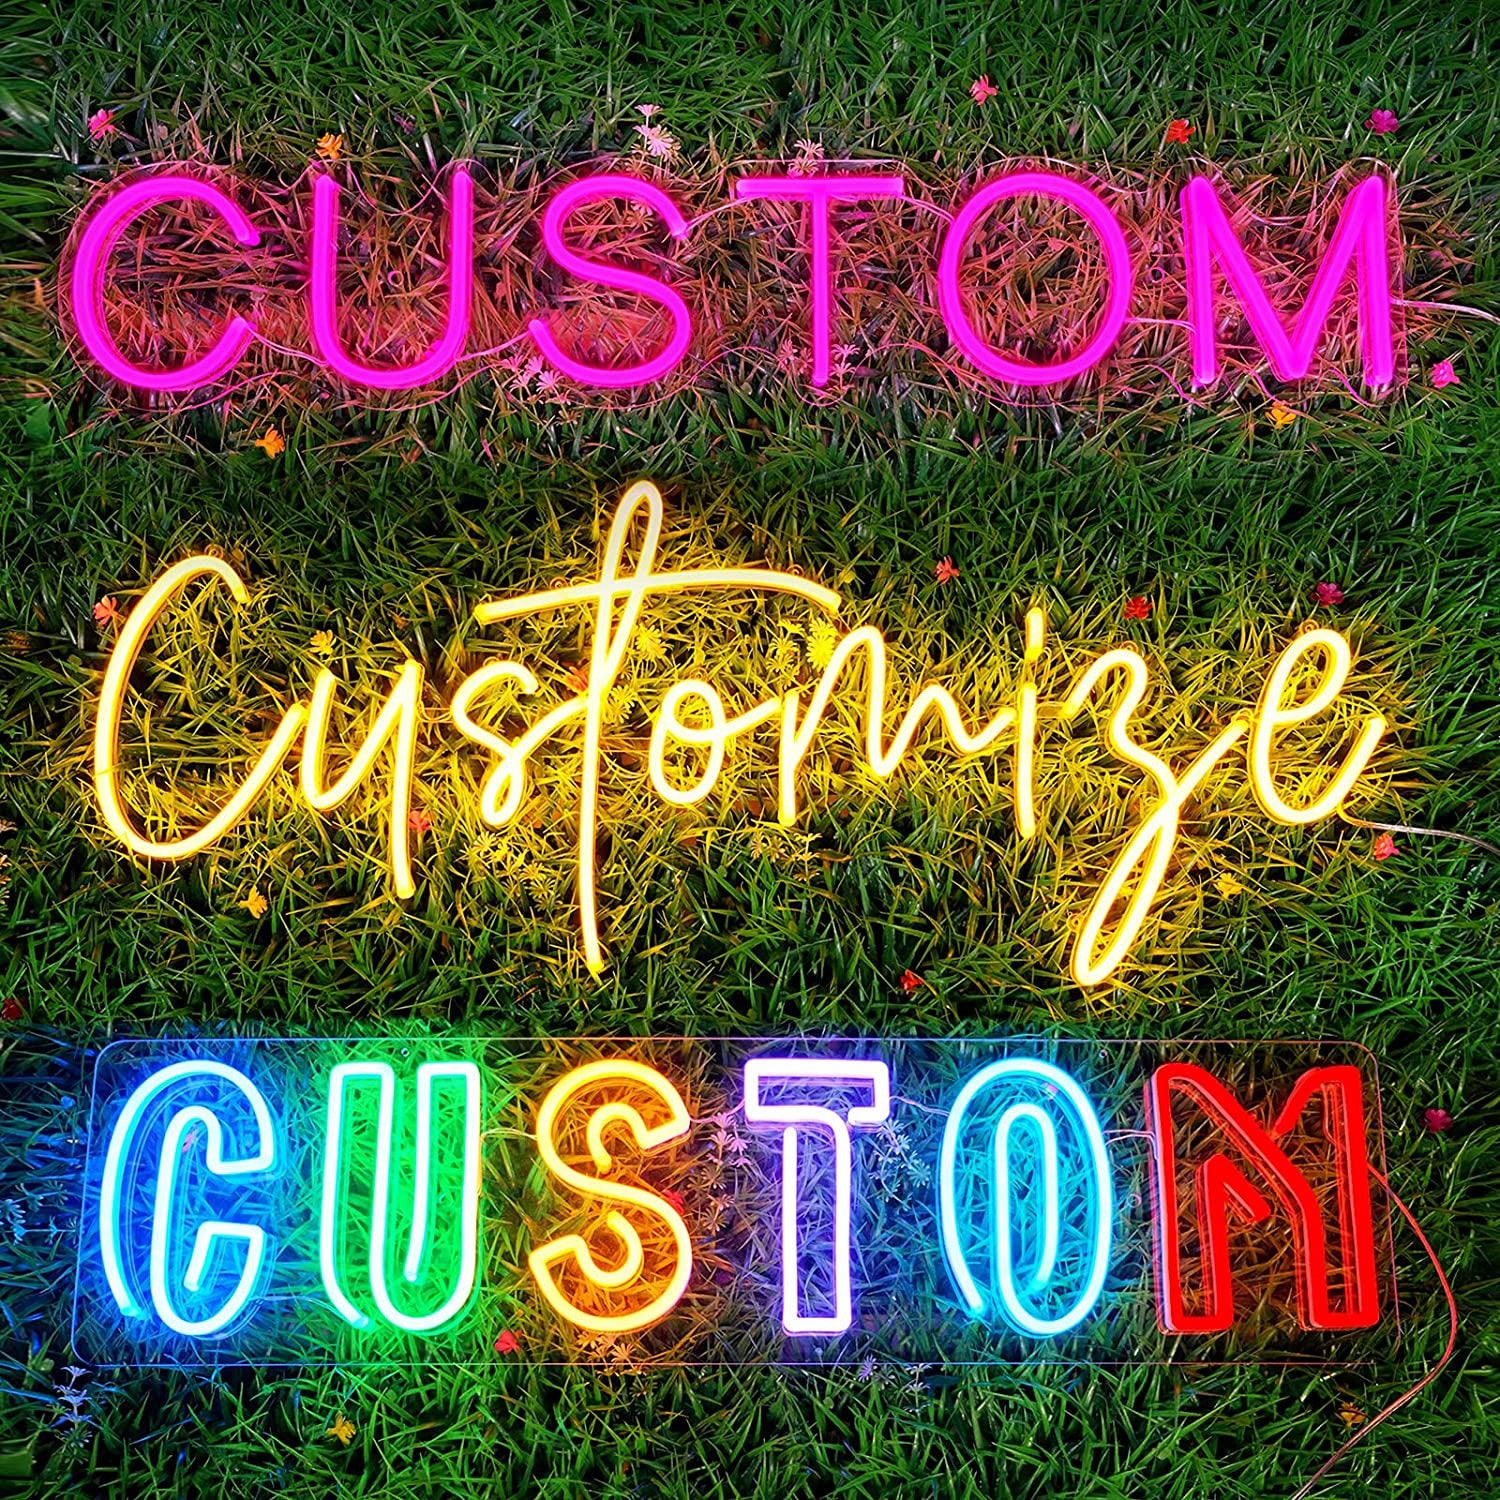 Custom Neon Signs, Personalized Neon Sign for Bedroom Wall Decor Large LED Signs for Wedding,Birthday Party, Bar,Company Logo Business,Name Sign 10